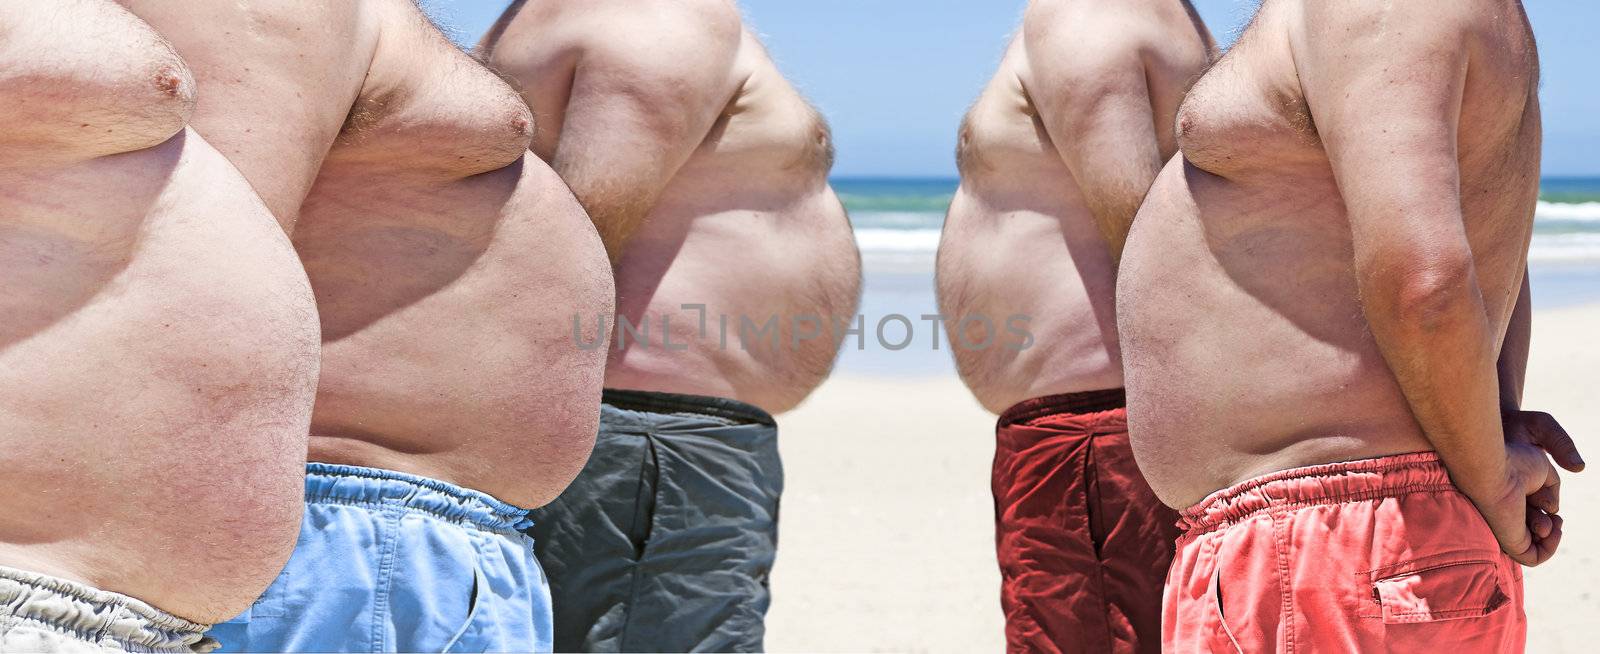 Five very obese fat men on the beach by tish1